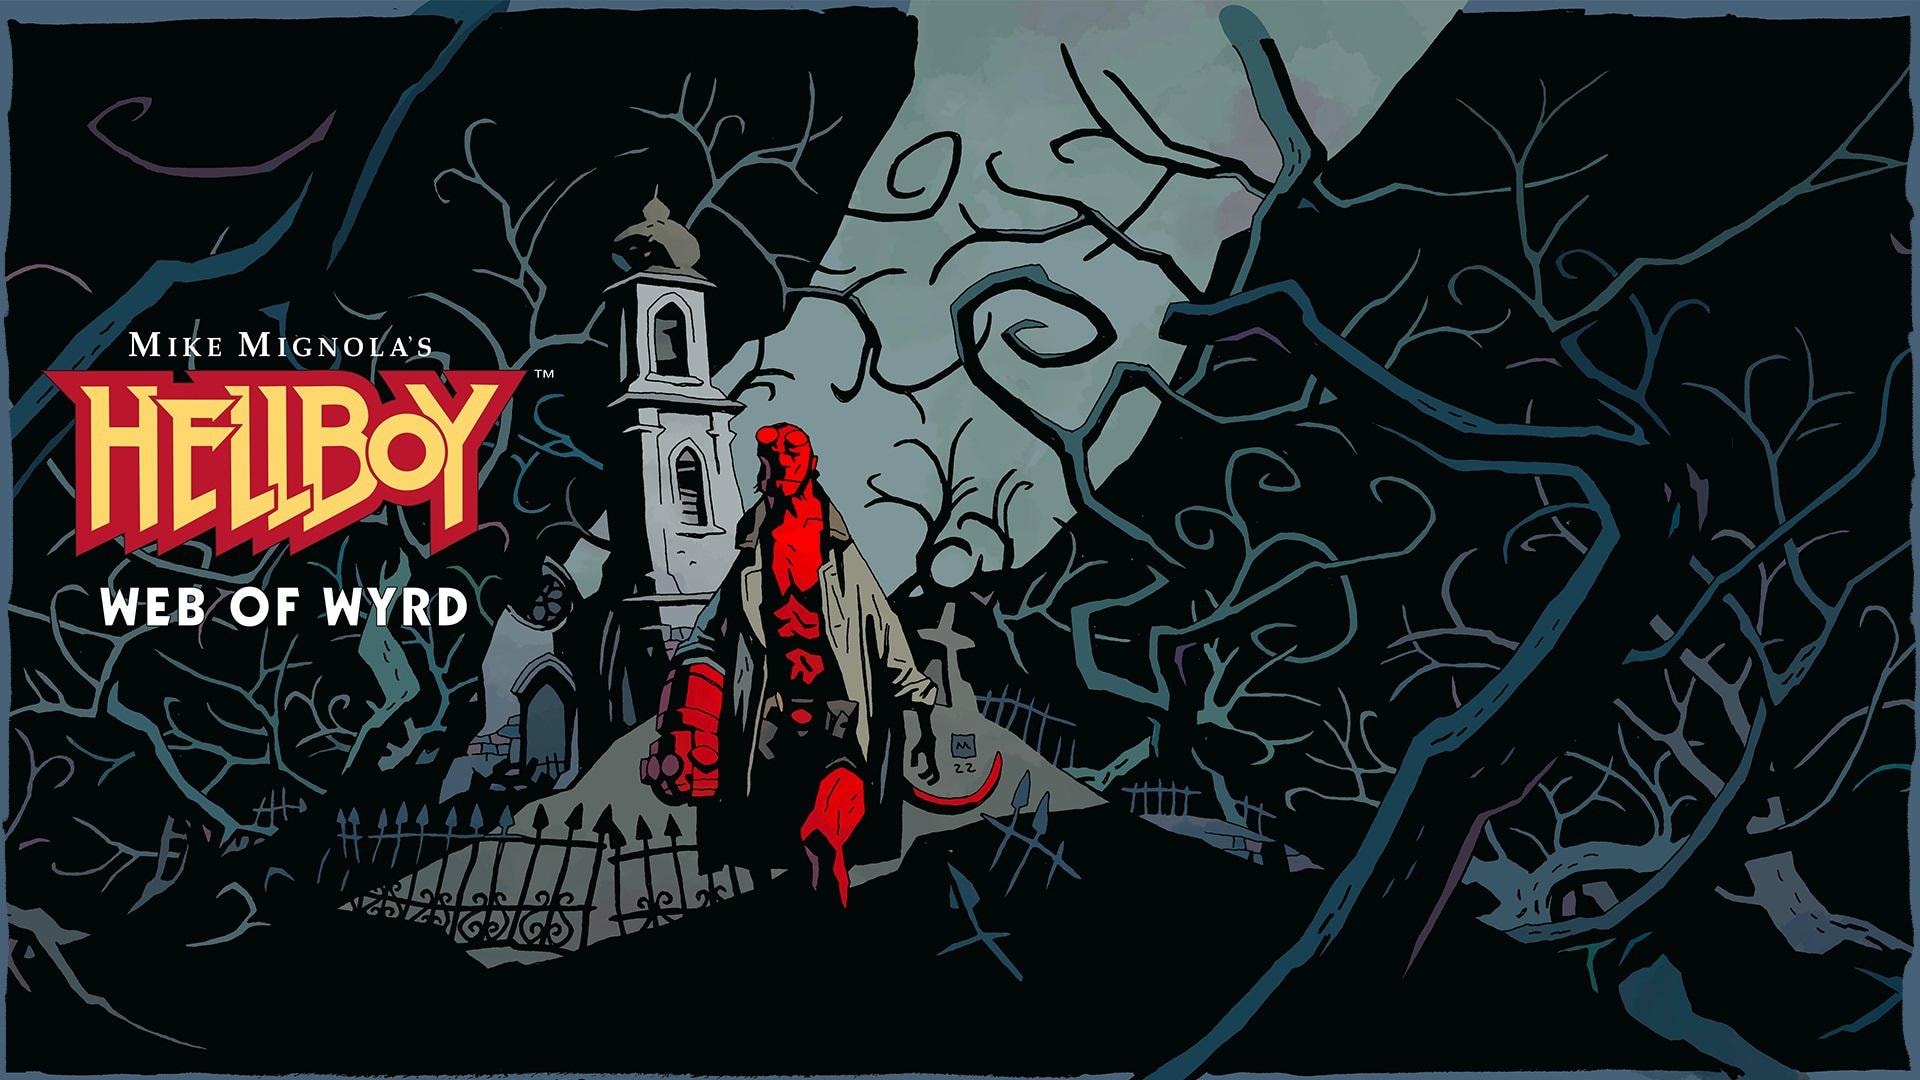 hellboy-web-of-wyrd-hopes-to-mix-hades-gameplay-with-comic-book-visuals